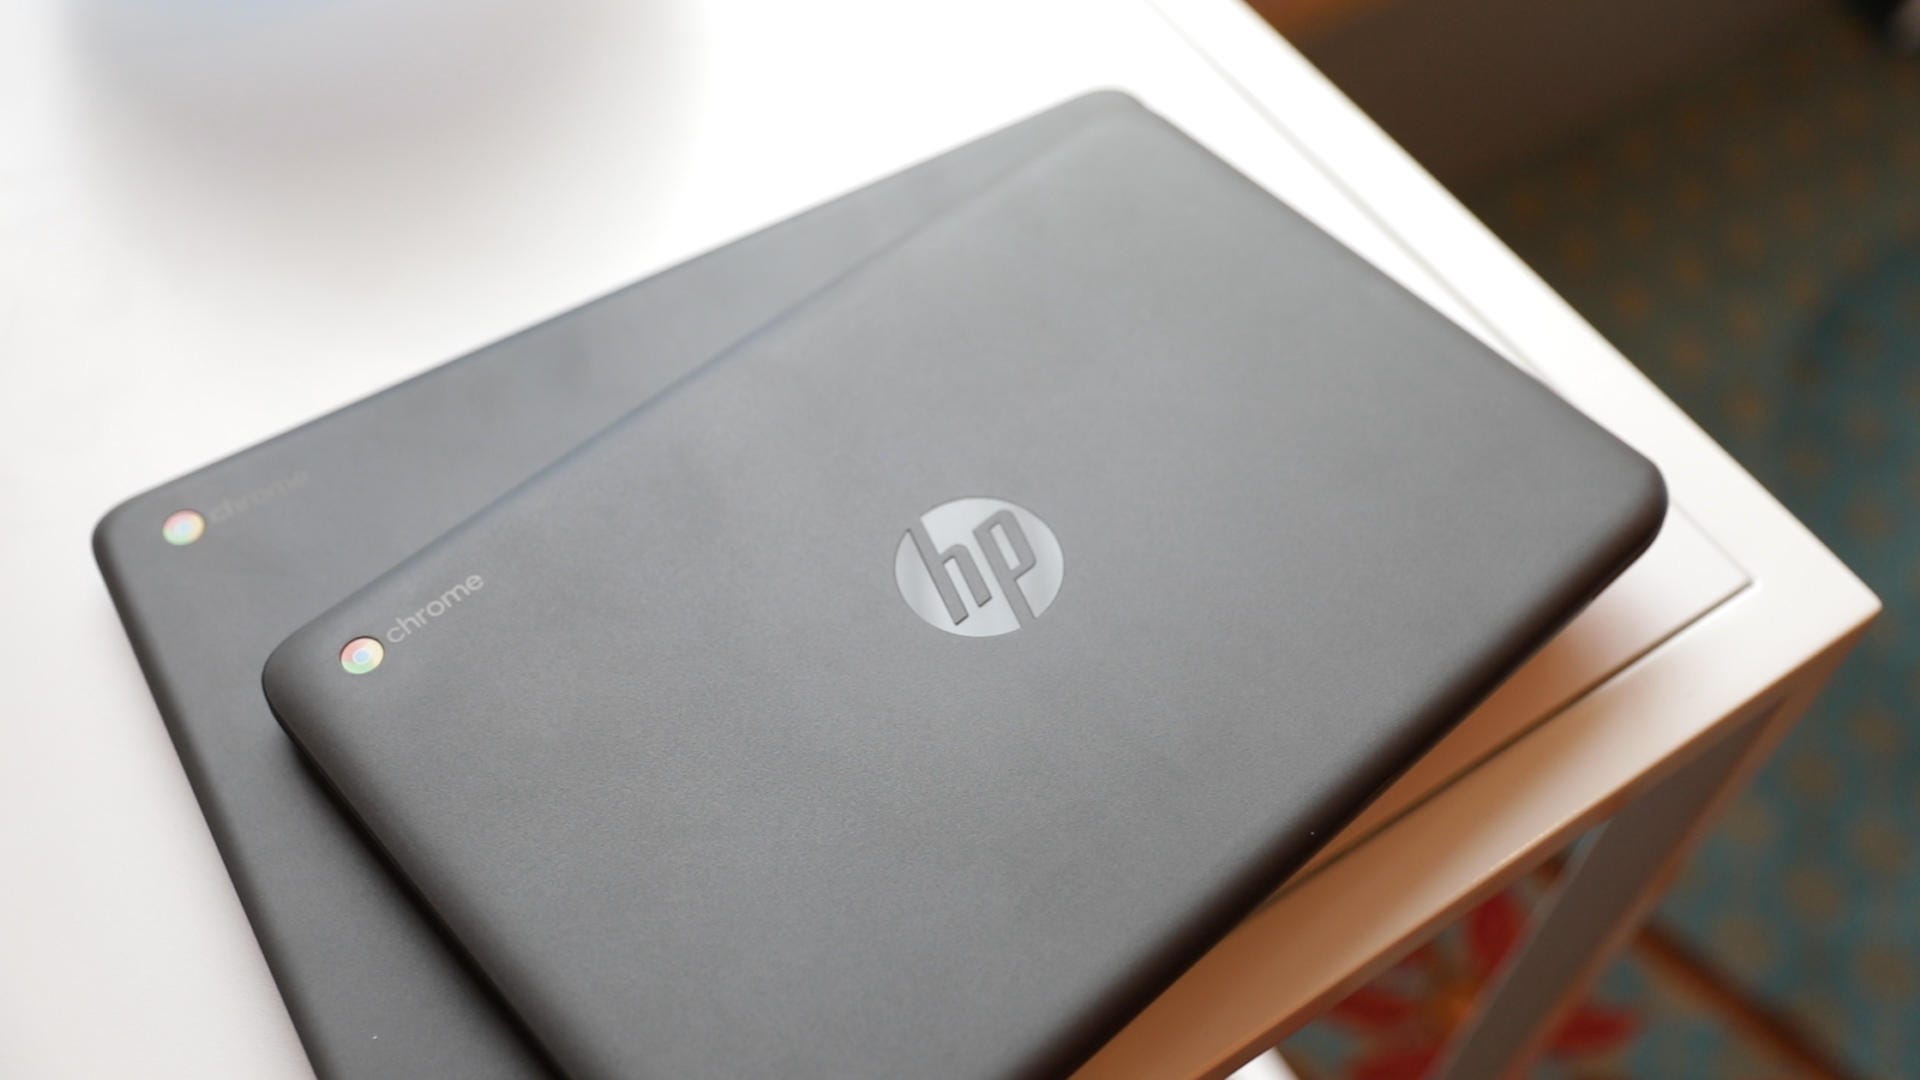 HP Chromebook G5 and G6 bring rugged style to the category - Video